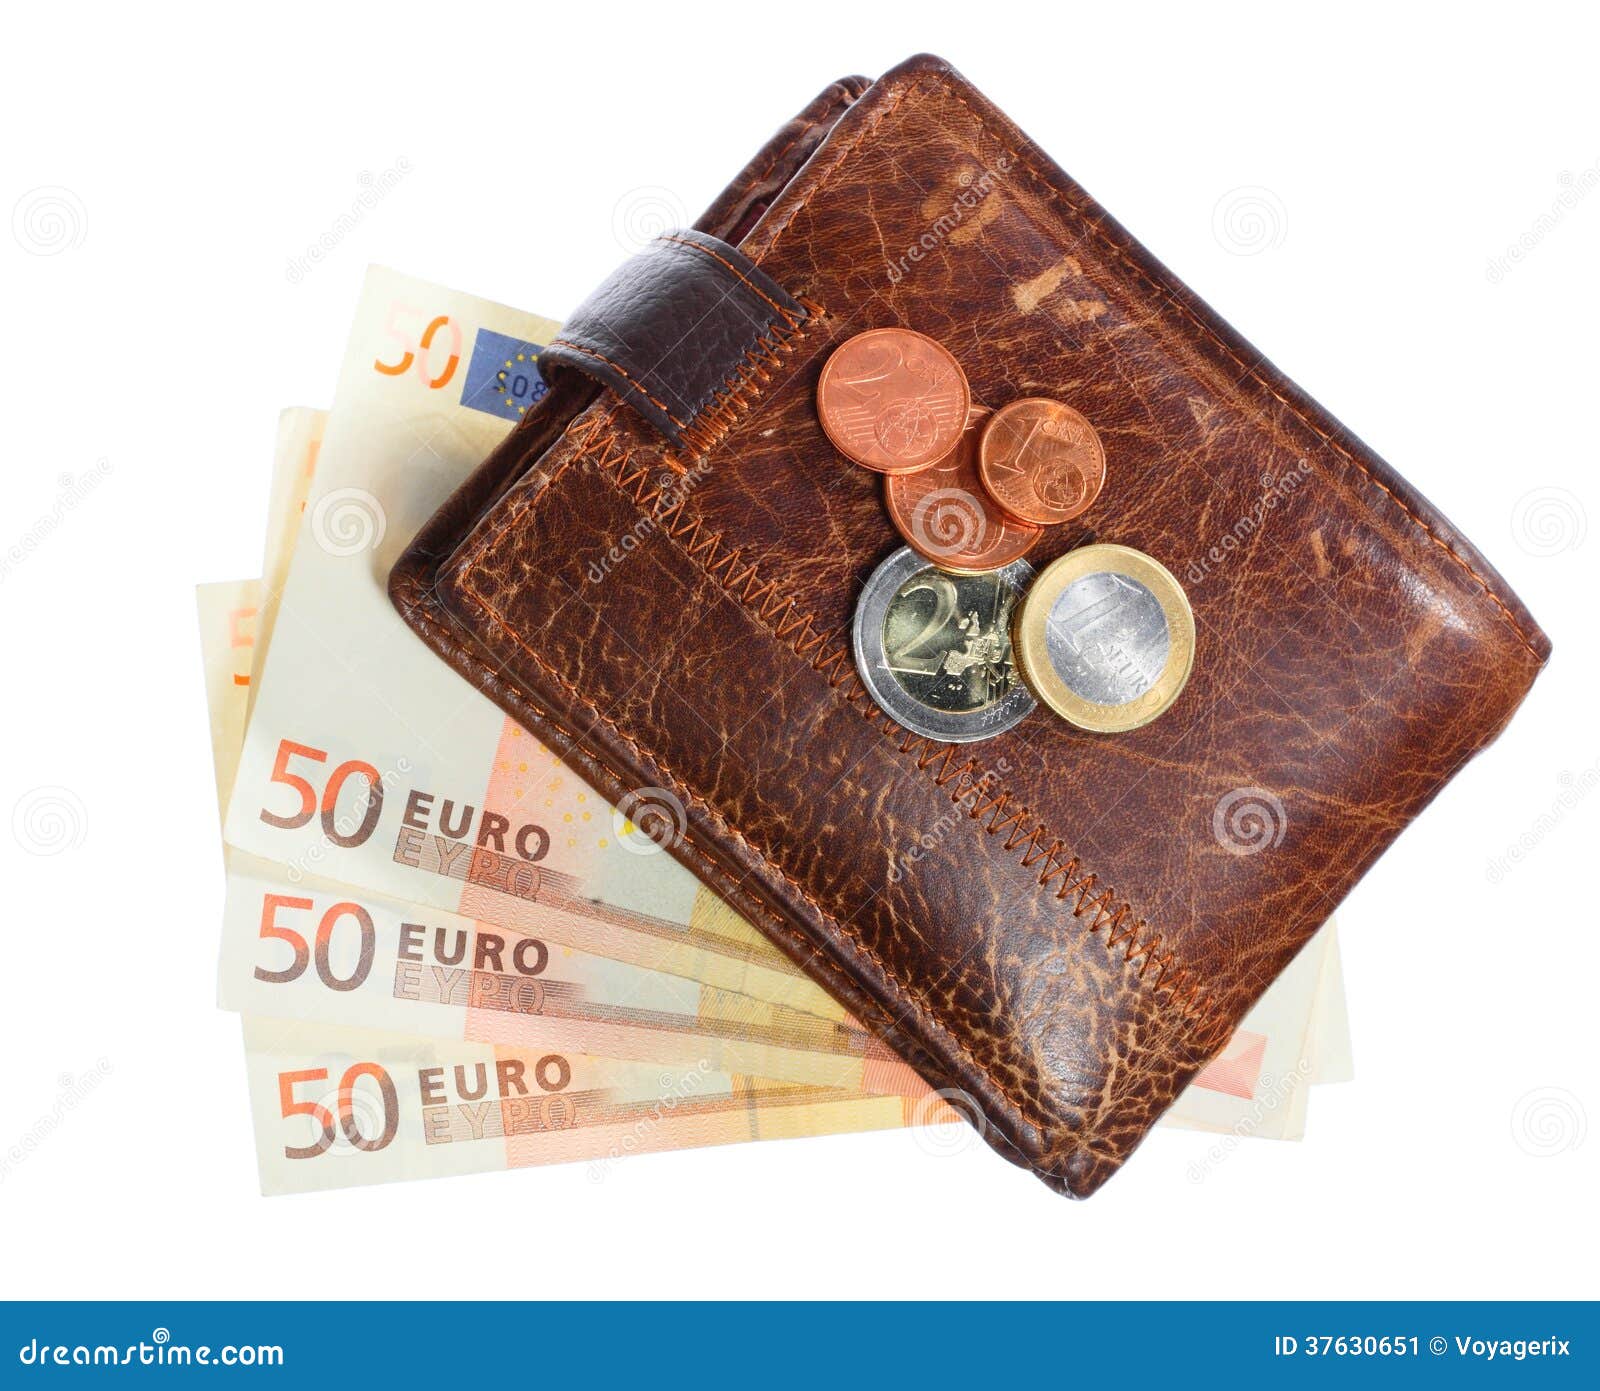 Economy And Finance. Wallet With Euro Banknote Isolated Stock Image - Image: 37630651